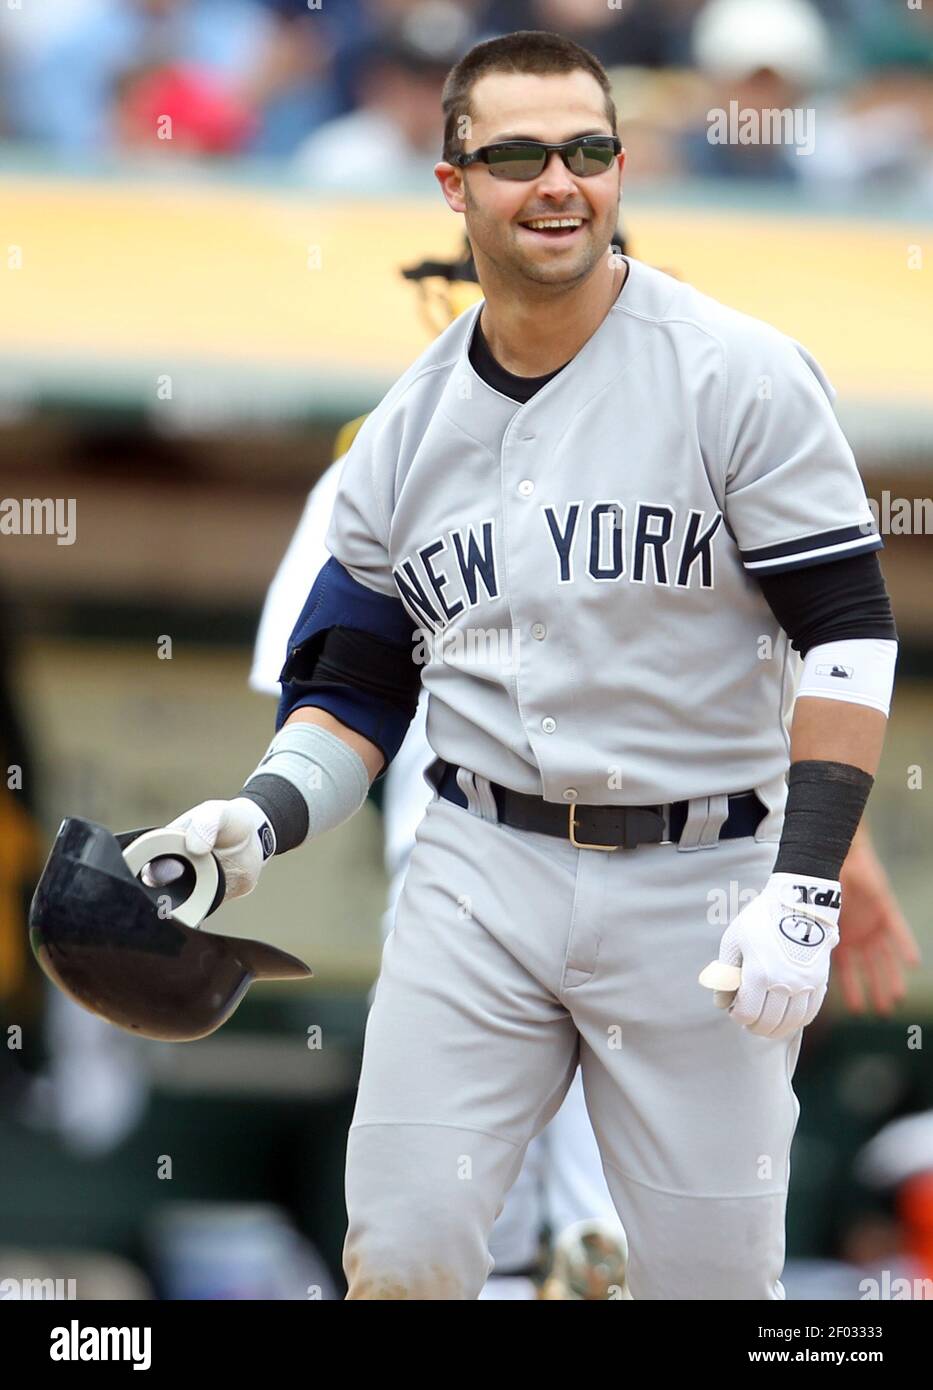 The New York Yankees' Nick Swisher smiles after striking out to